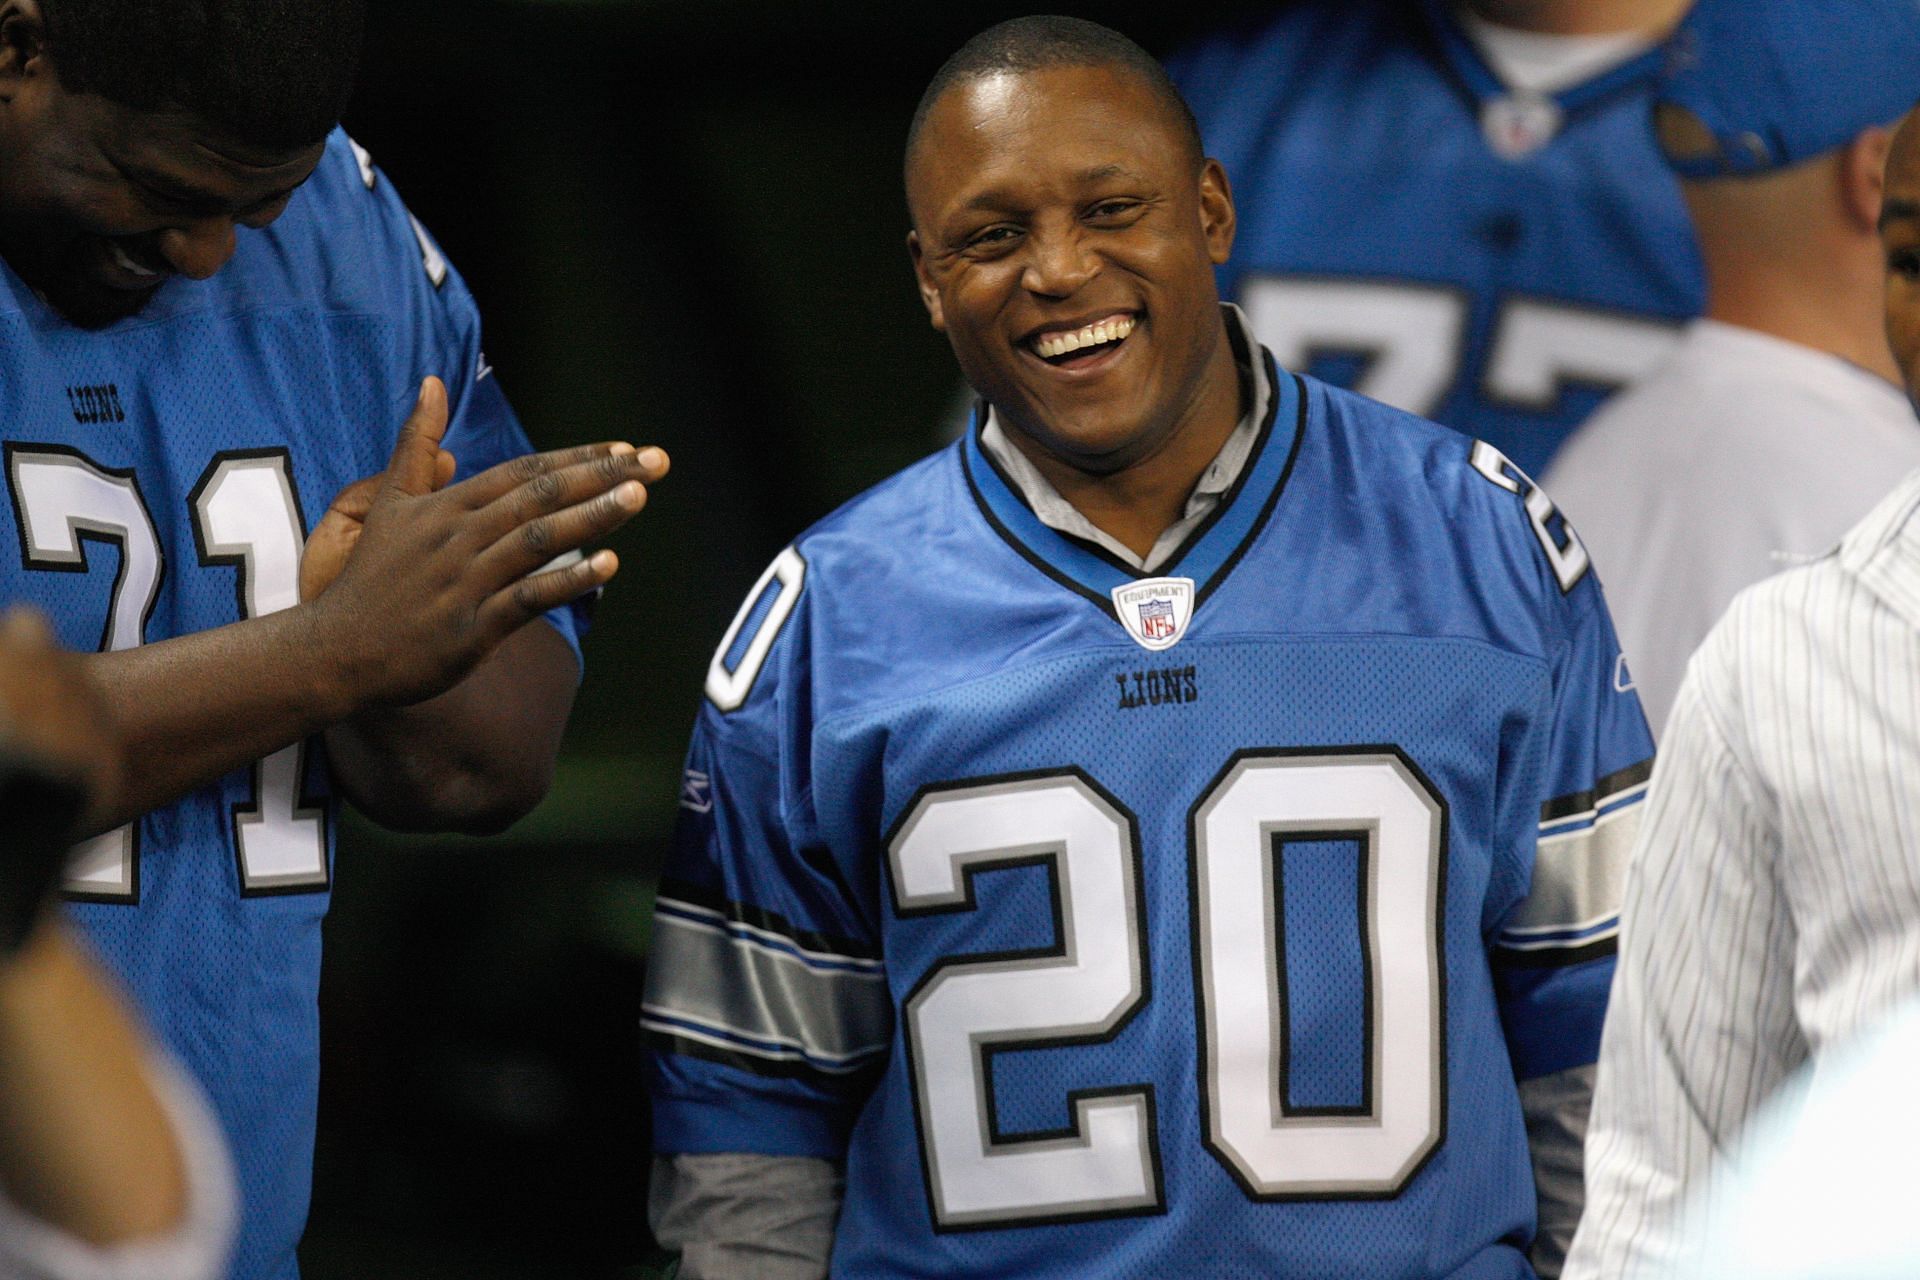 Barry Sanders suffered playoff disappointment after disappointment in Detroit.